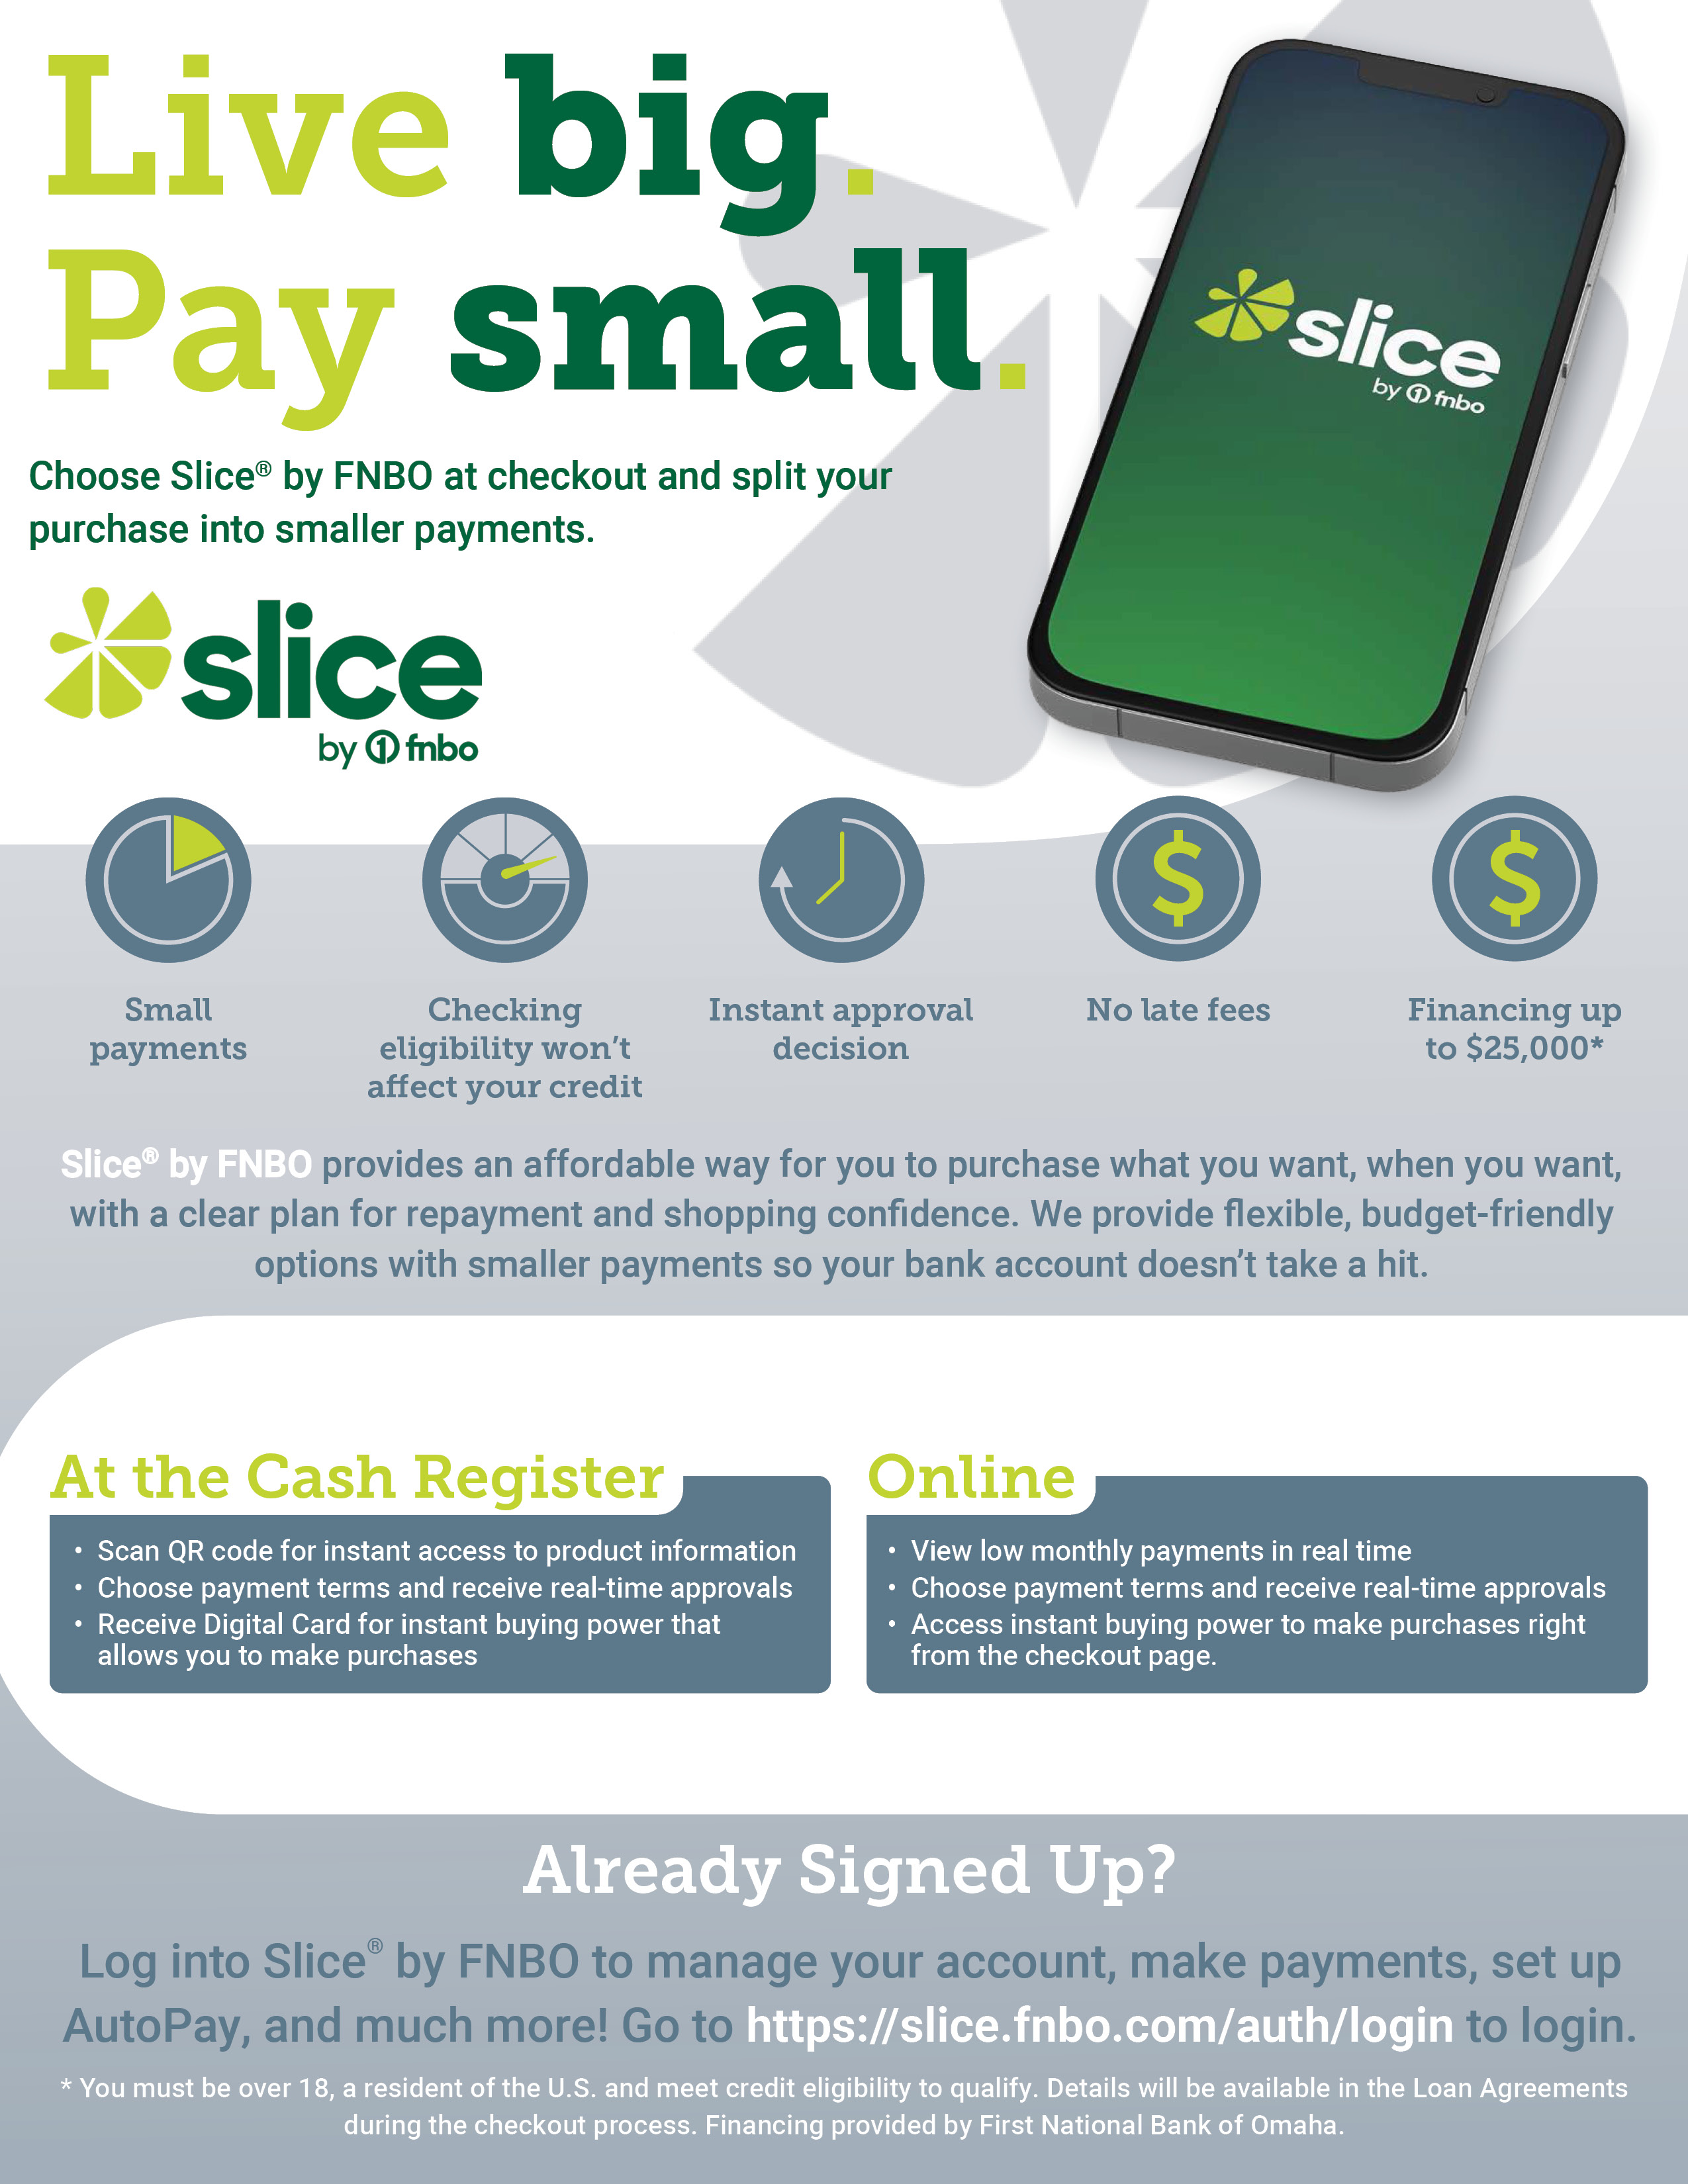 Live Big, Pay Small.  Choose Slice by FNBO at checkout and split you purxhase into smaller payments. Slice by FNBO provides an affordable way for you to purchase what you want, when you want, with a clear plan for repayment and shopping confidence.  We provide flexible, budget-friendly options with smaller payments so you bank account doesn't take a hit.  Already signed up? Click to manage your account, make payments, set up AutoPay and much more!